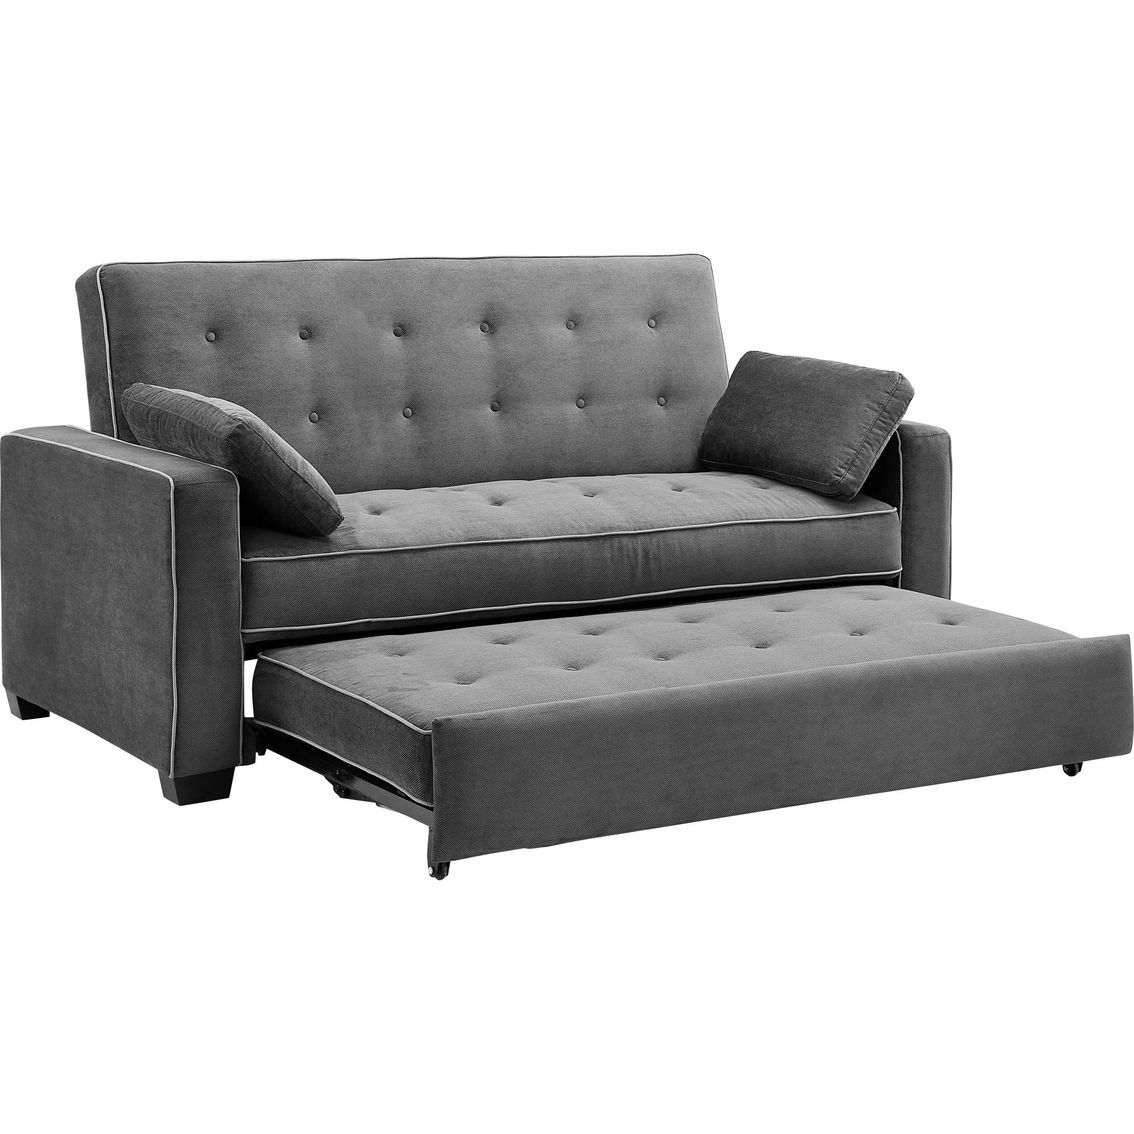 Serta Augustine Convertible Sofa Bed For Convertible Sofas (View 1 of 10)